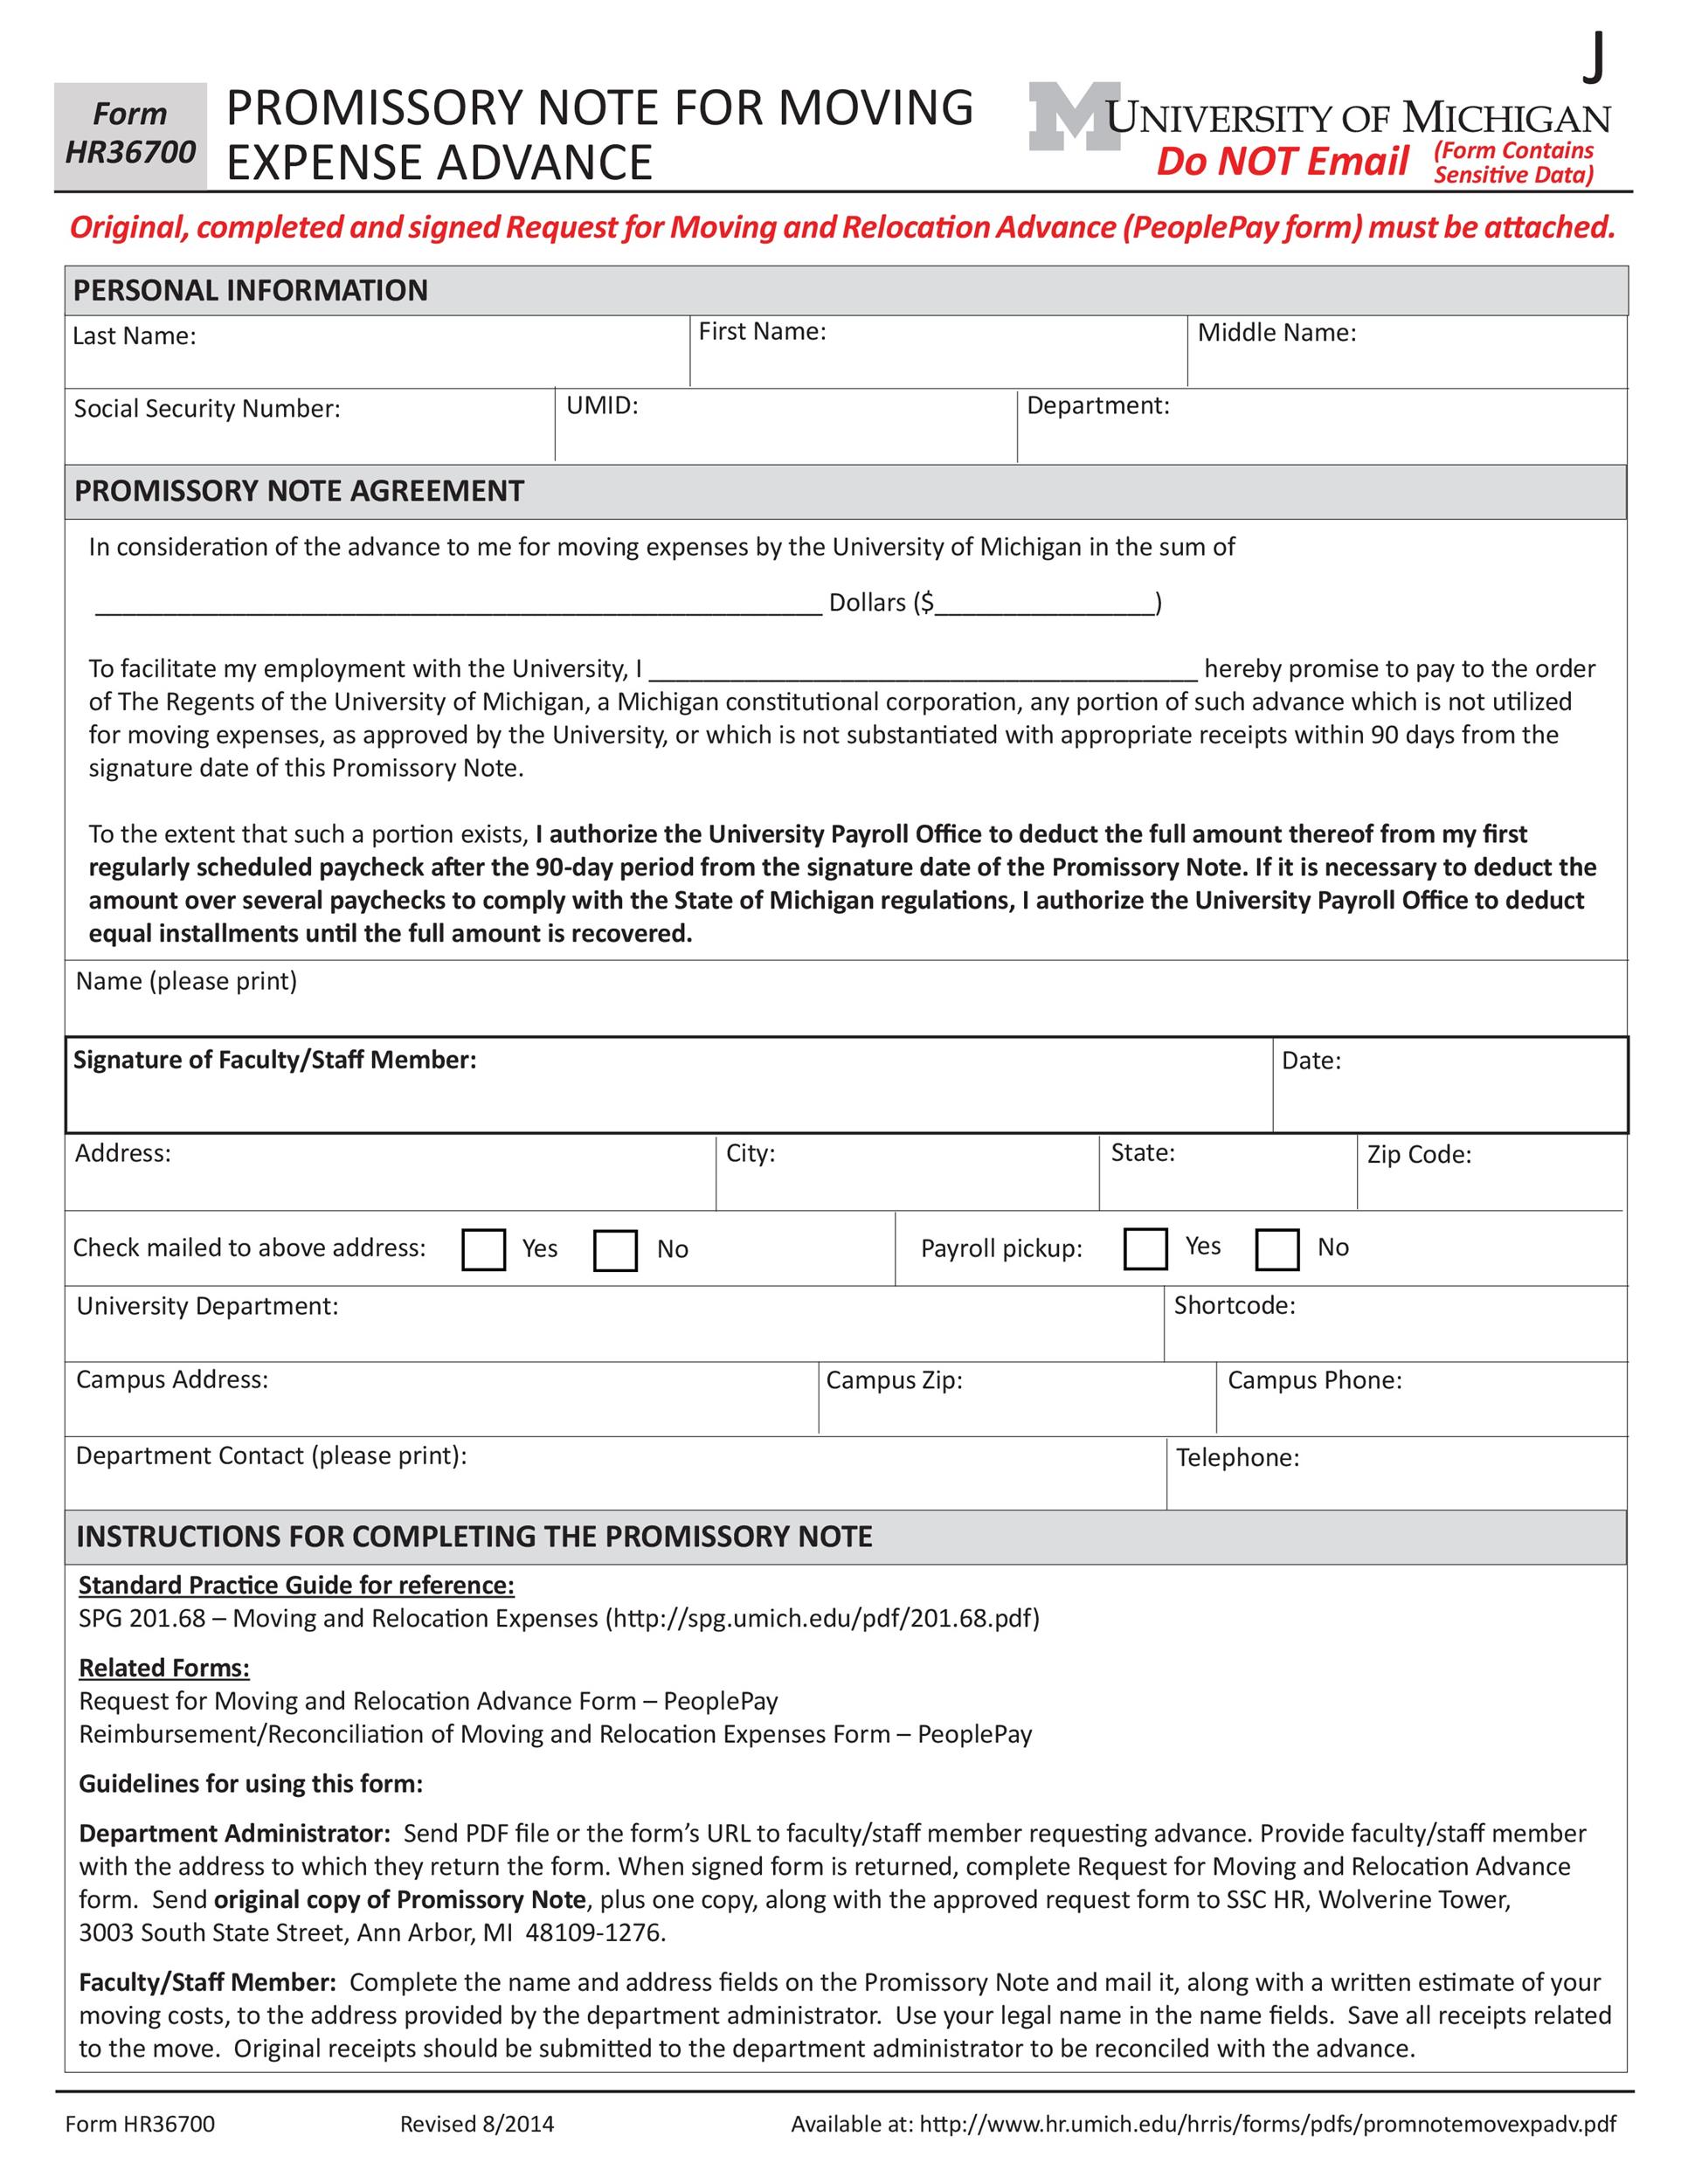 Free promissory note template 13